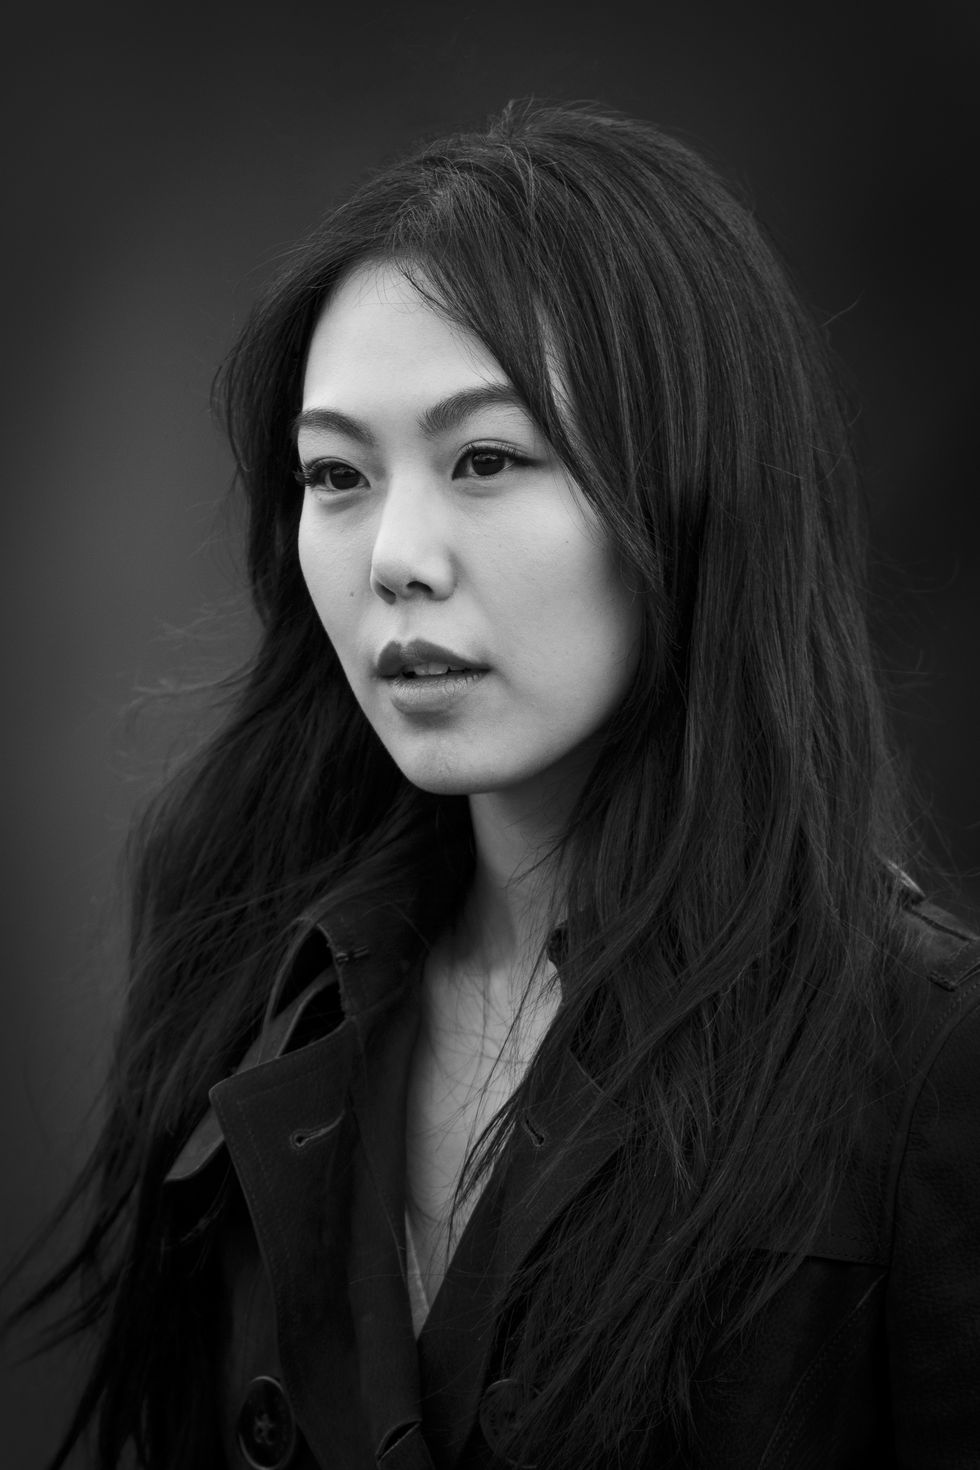 LONDON, ENGLAND - FEBRUARY 23: Actor Kim Min-Hee is photographed on February 23, 2015 while attending Burberry Porsum Fashion show in London, England. (Photo by Tristan Fewings/Getty Images Portrait)